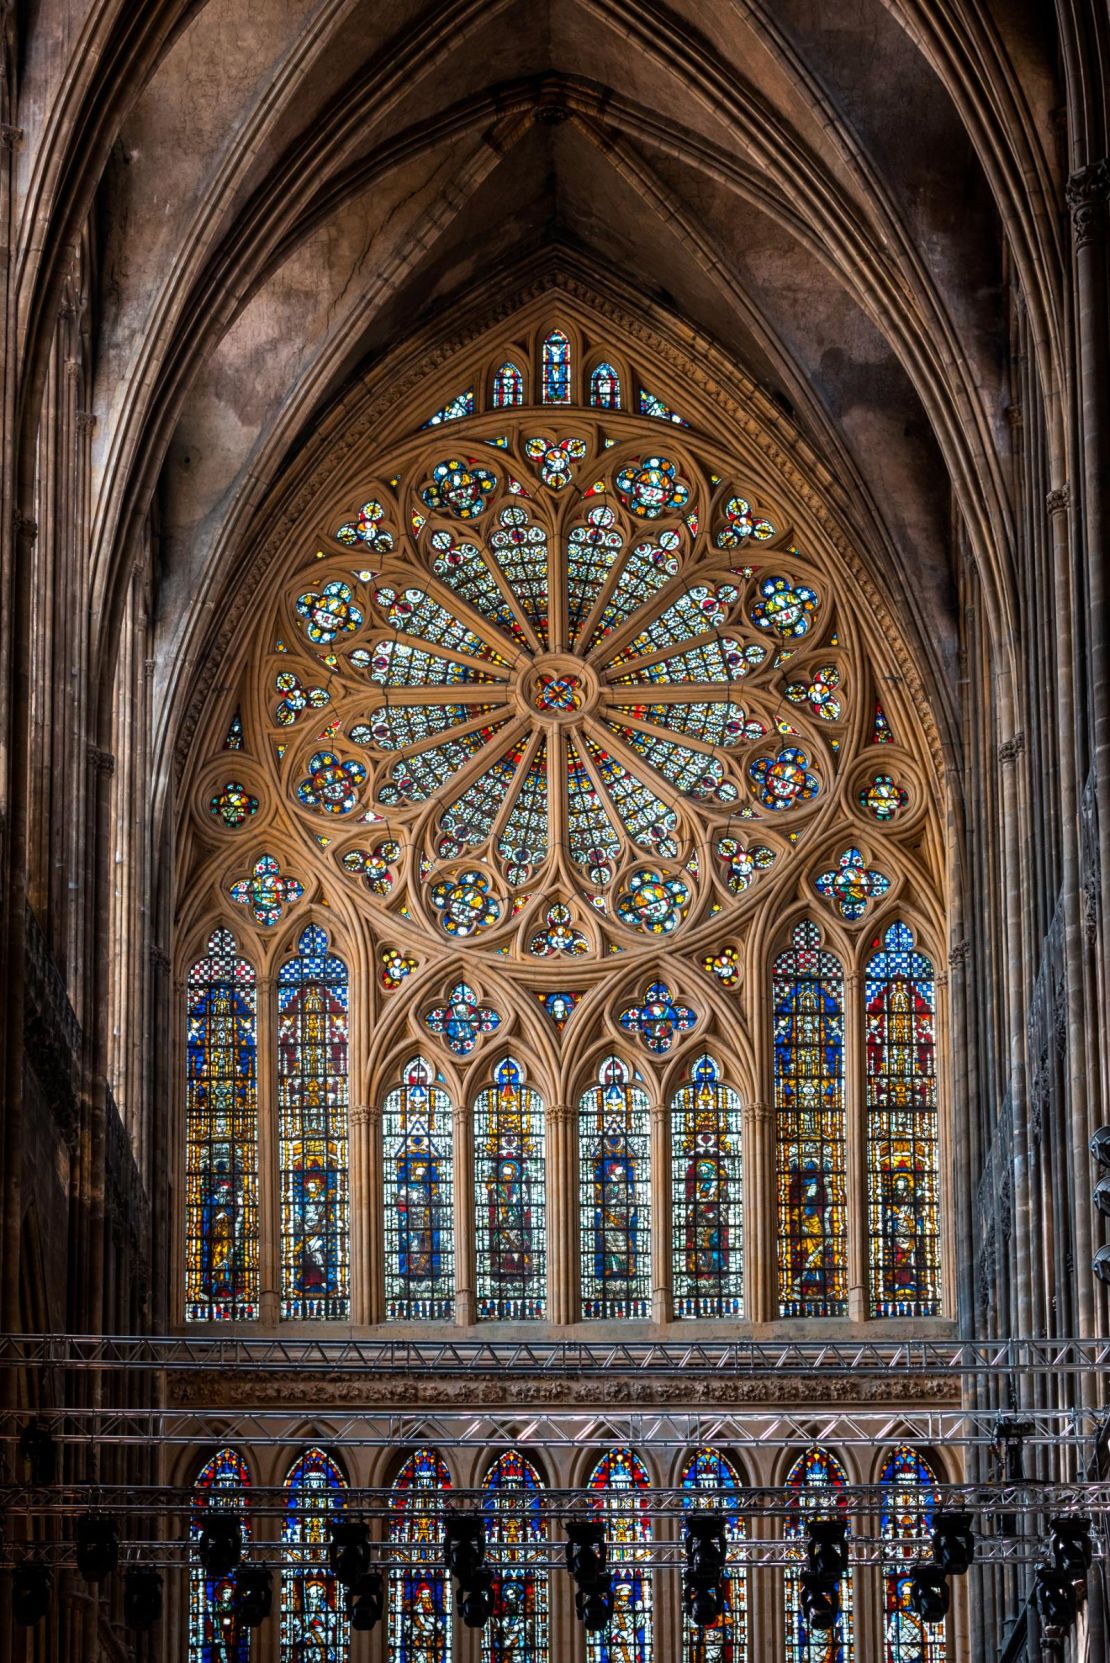 A 14th-century rose window at Metz Cathedral.